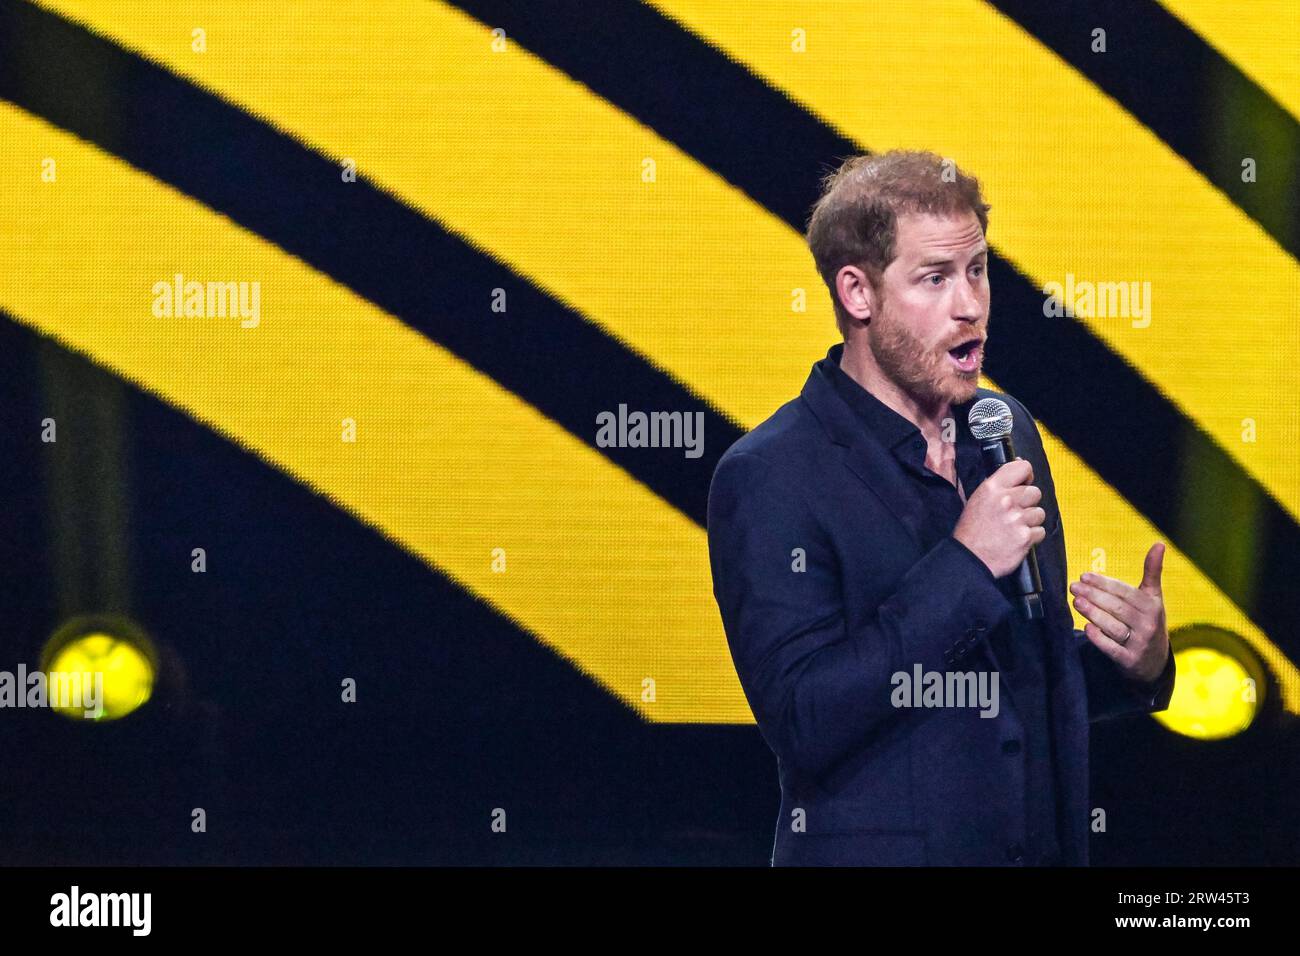 Düsseldorf, Germany. 16th Sep, 2023. Prince Harry, the Duke of Sussex speaks at the ceremony. The Invictus Games Düsseldorf conclude with a closing ceremony at Merkur Spiel Arena. 21 nations participated in the games this year. Athletes parade around the arena and participate, and there are performances from singers Sam Ryder and Rita Ora, as well as speeches from Prince Harry, German President Steinmeyer and other dignitaries. Credit: Imageplotter/Alamy Live News Stock Photo